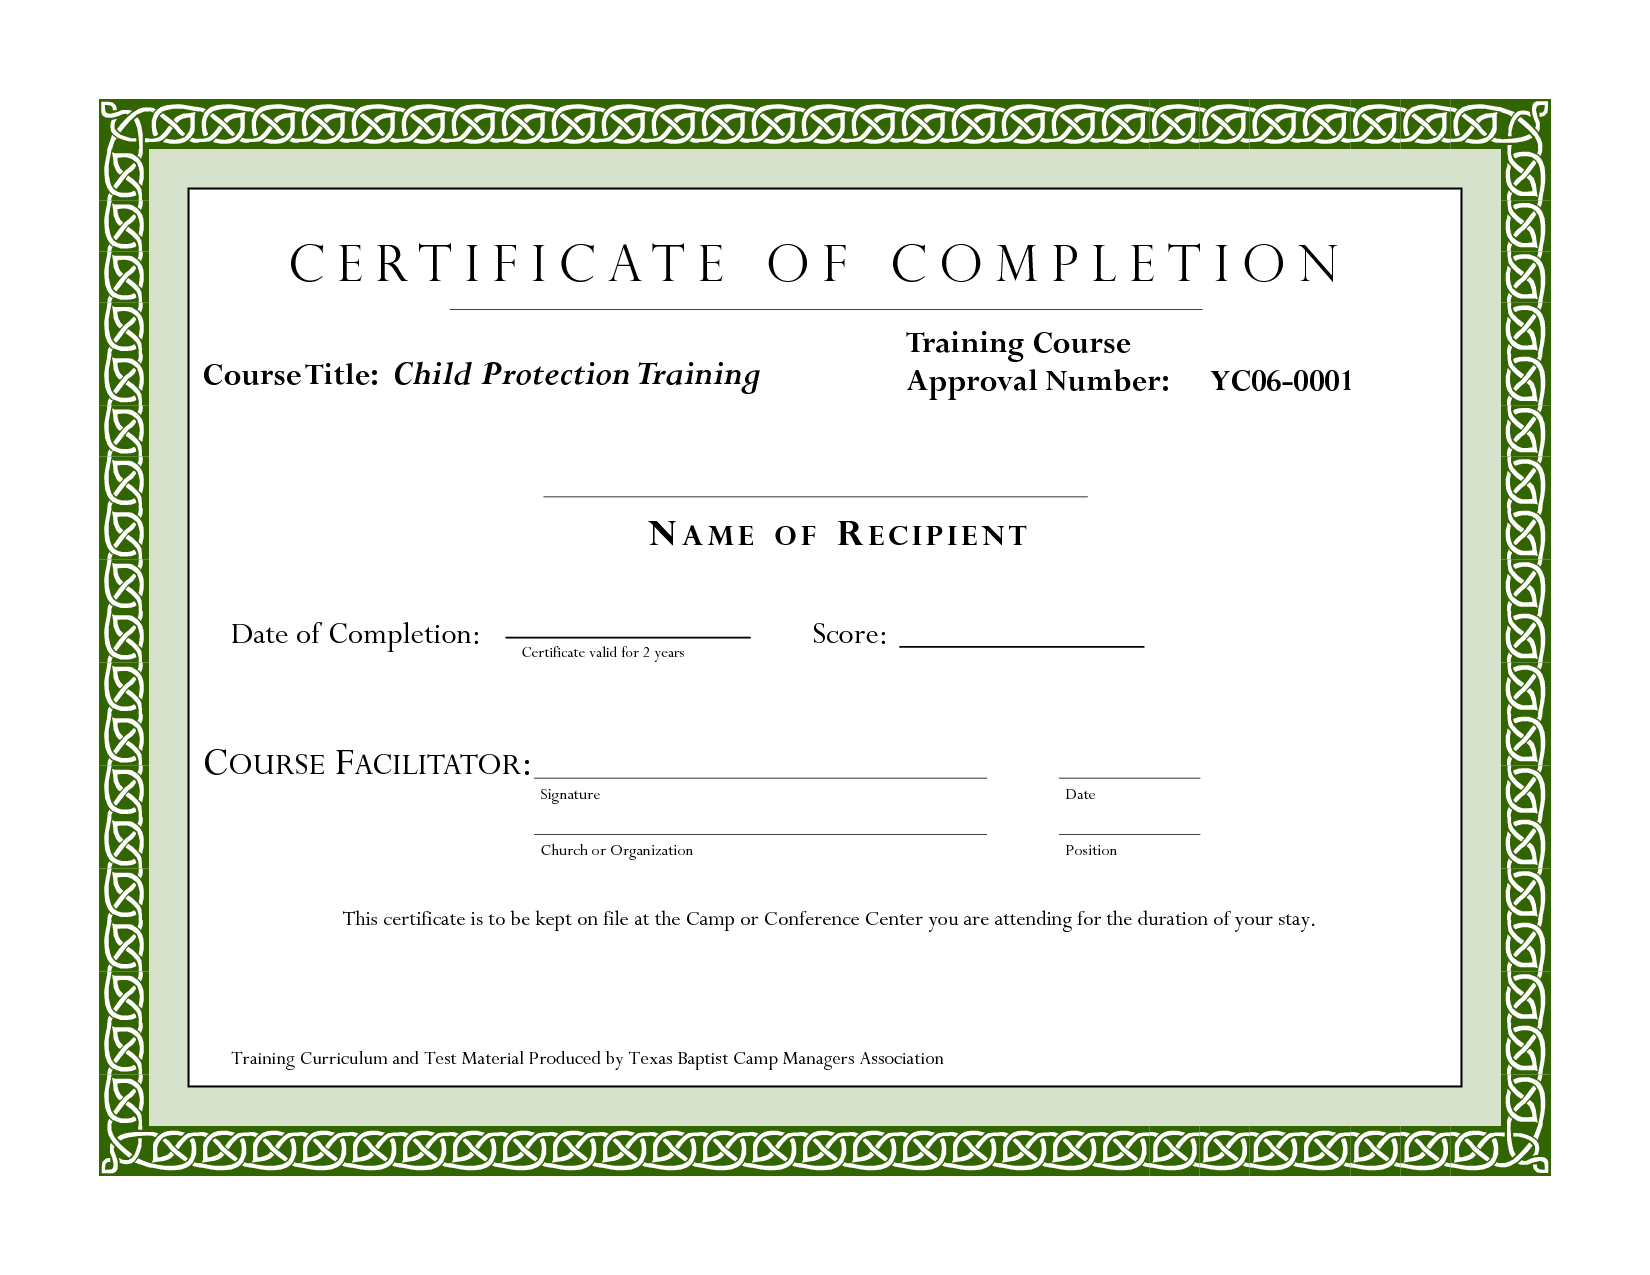 Course Completion Certificate Template | Certificate Of Intended For Free Training Completion Certificate Templates